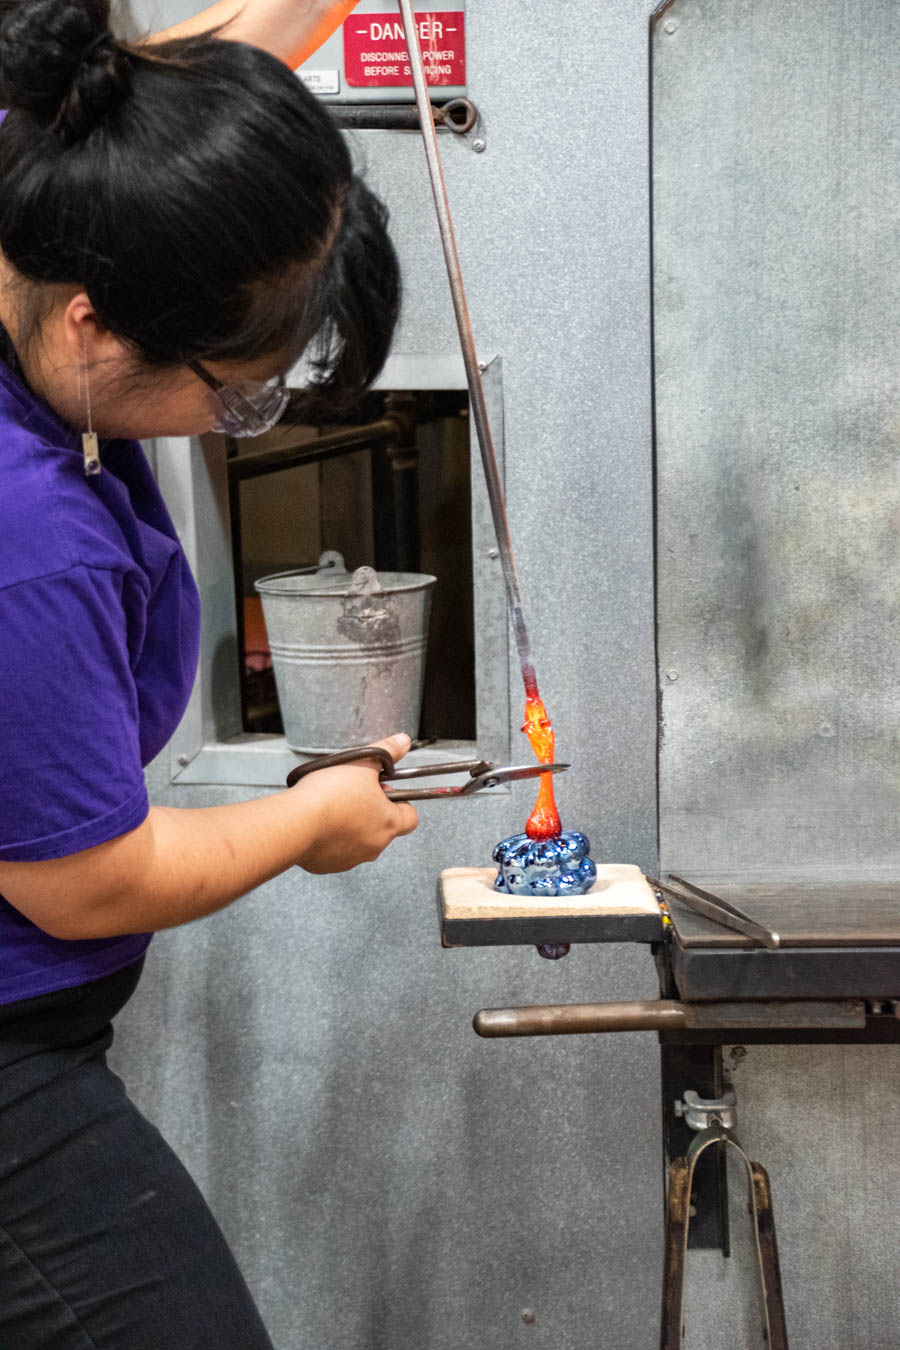 Corning Museum of Glass - Make Your Own Glass